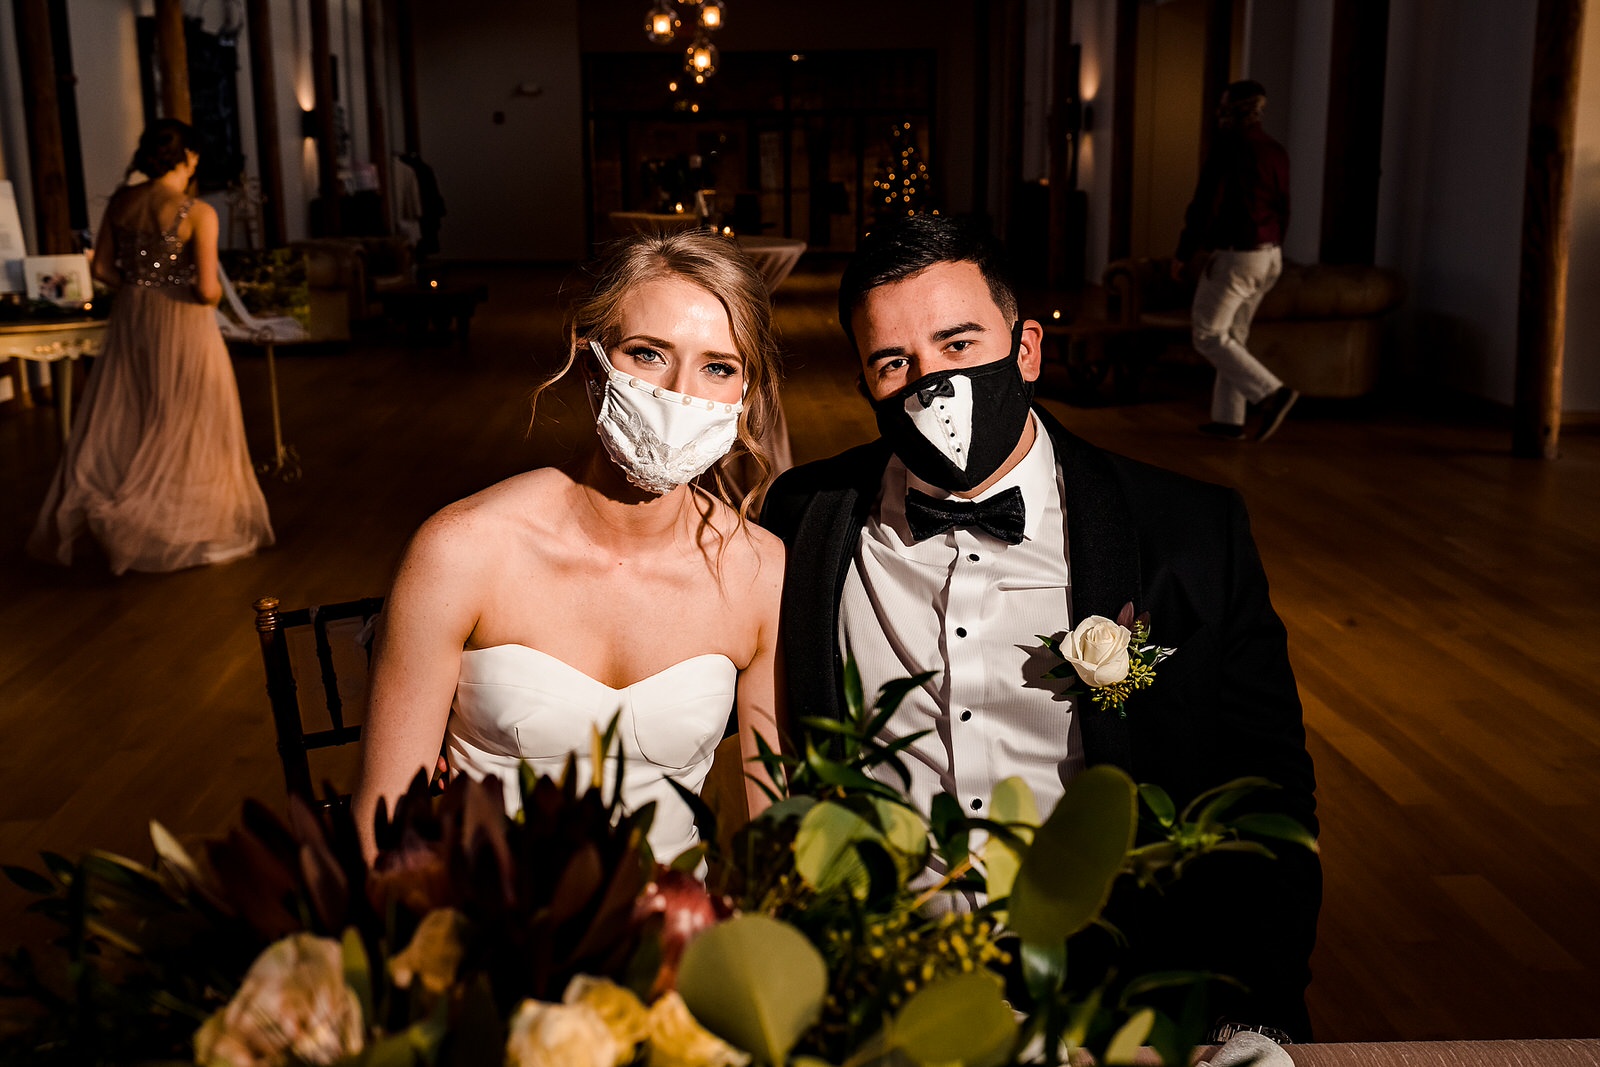 Custom bride and groom masks for Covid weddings - handmade by a friend of the family